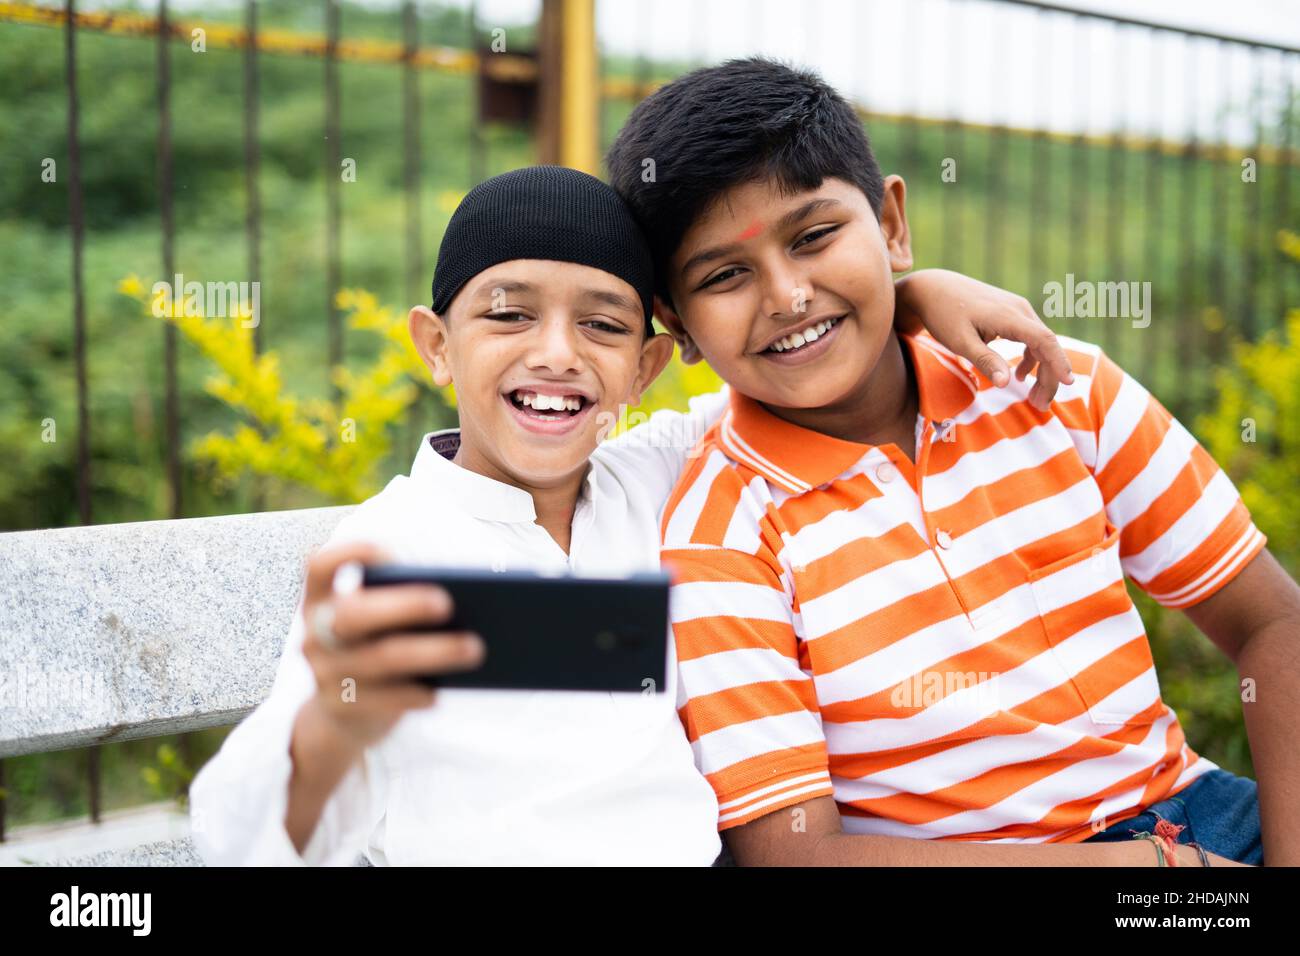 Two happy multiethnic kids taking selfie on mobile phone at park - concpet of friendship, religious diversity and social Harmony Stock Photo